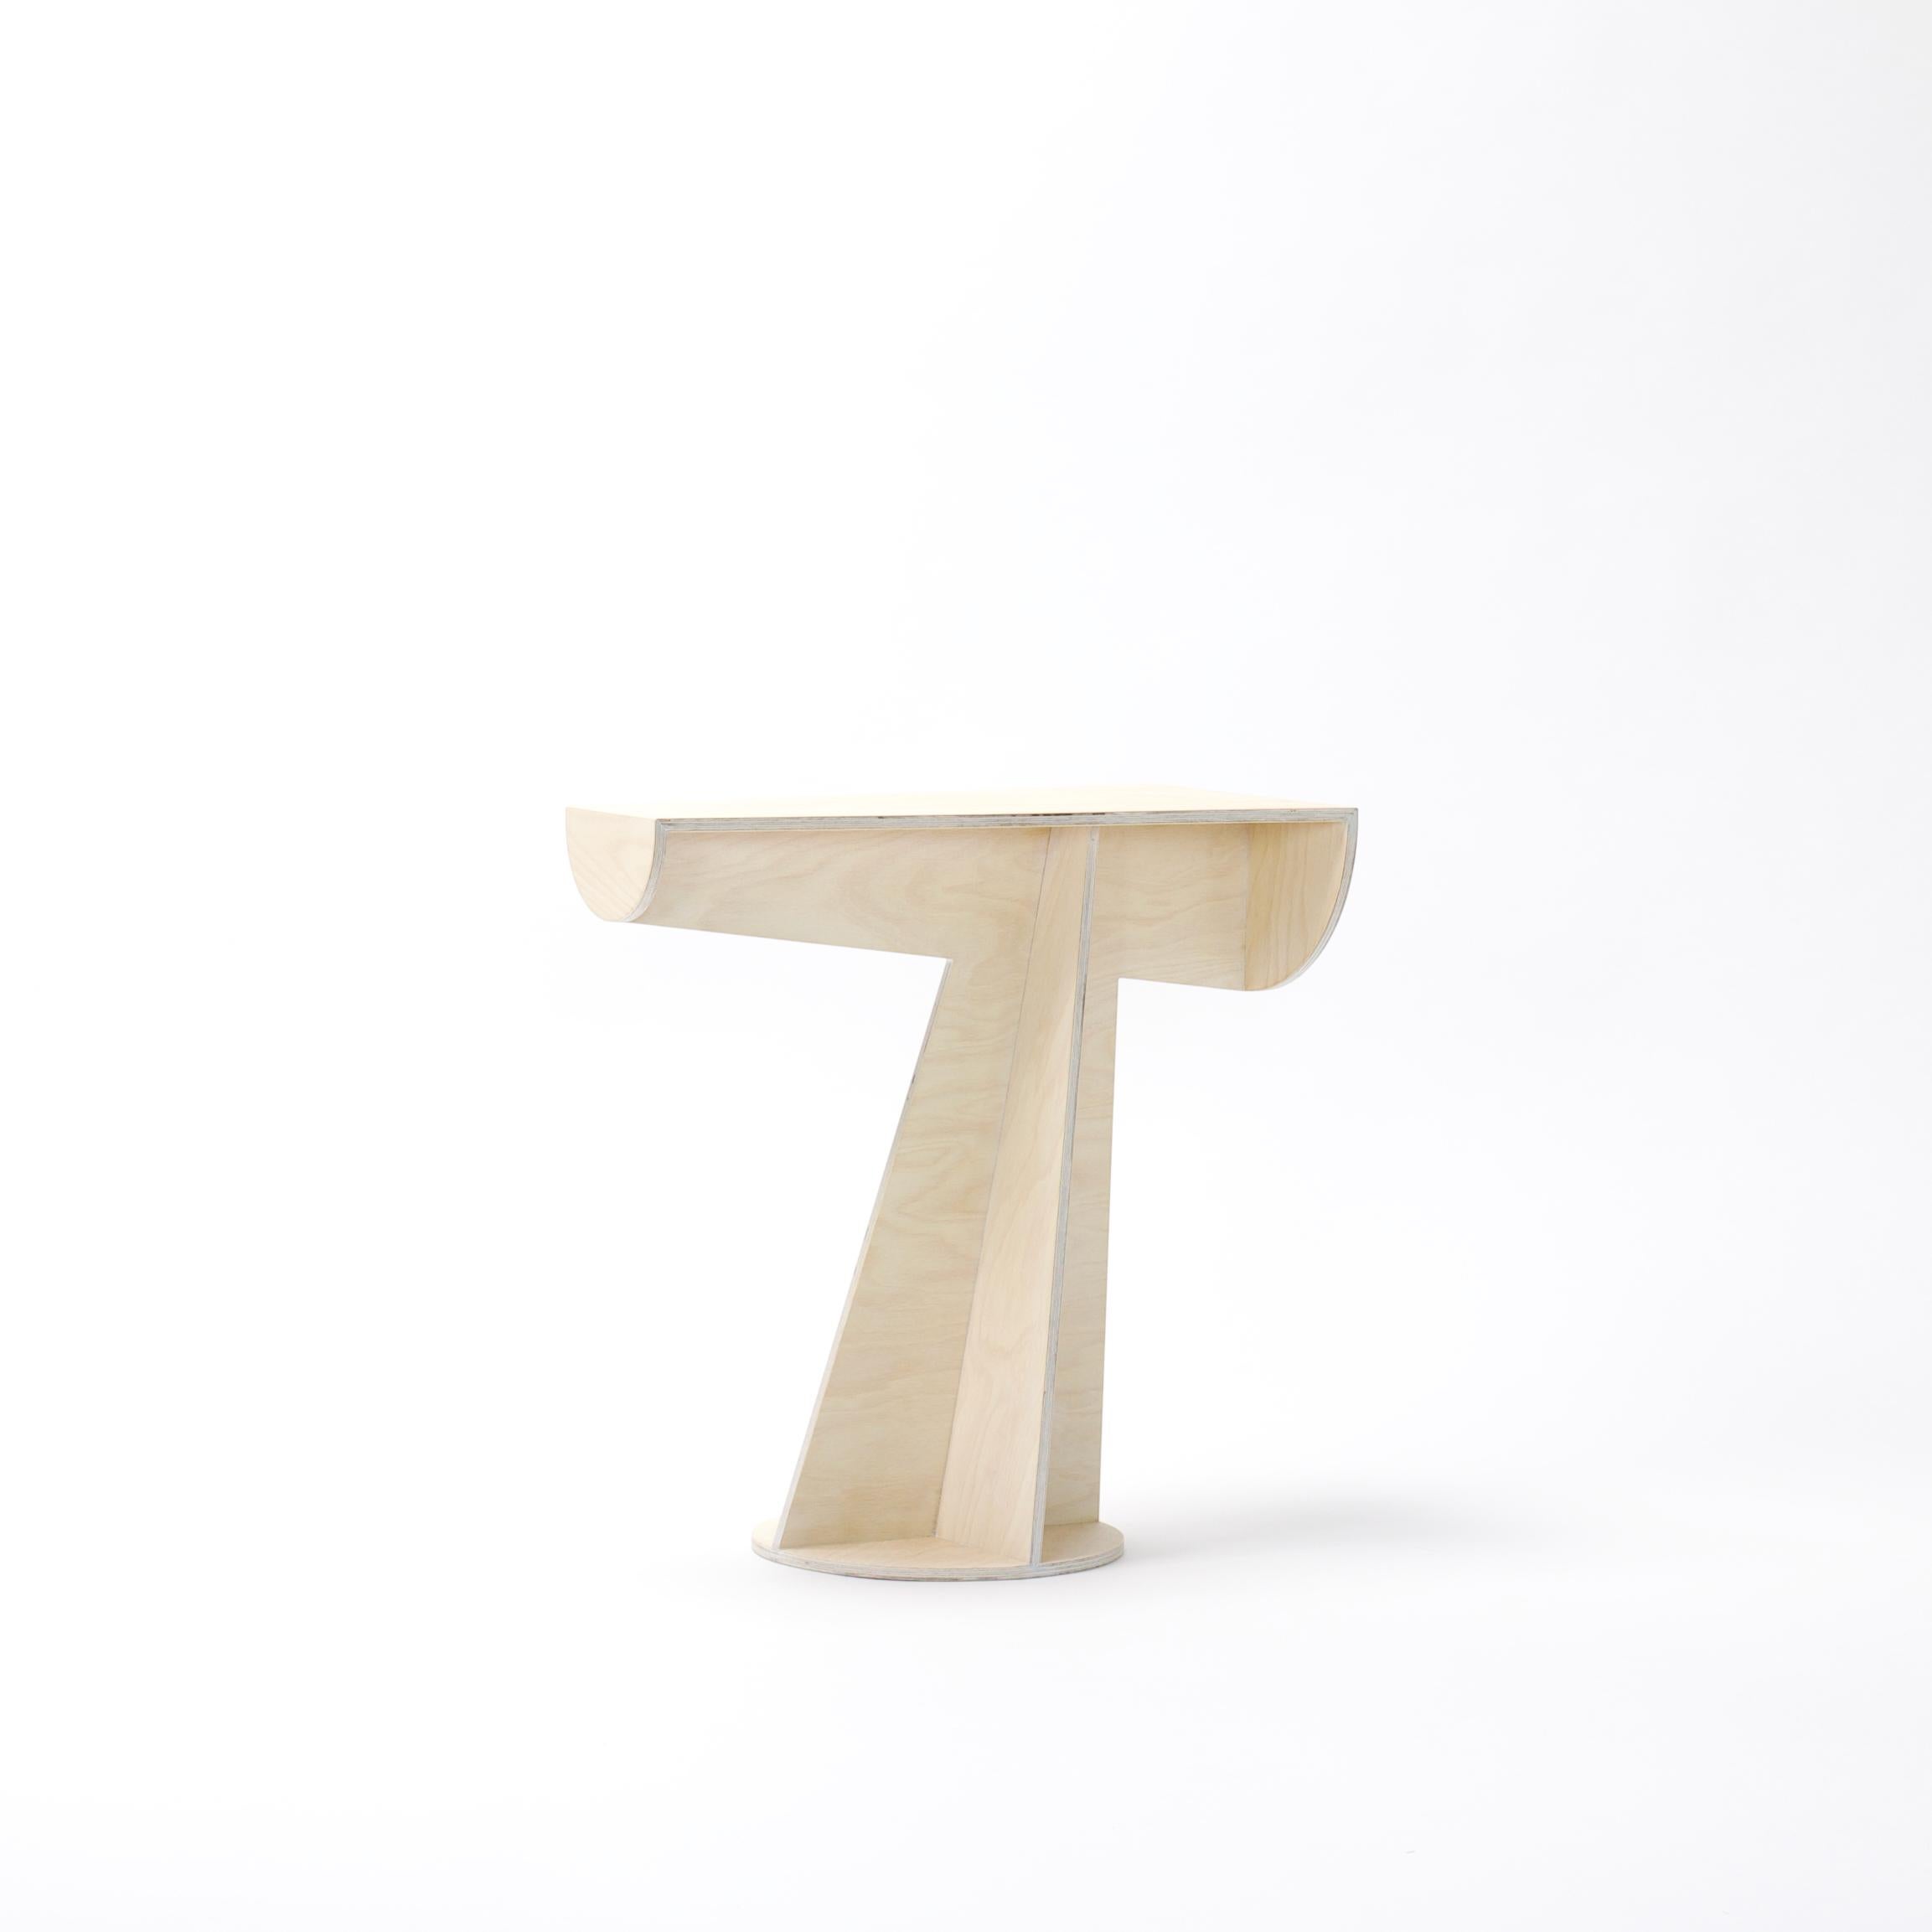 Less Side Table by Studio Yolk
Dimensions: W 24 x D 48 x H 48 cm
Materials: Plywood

